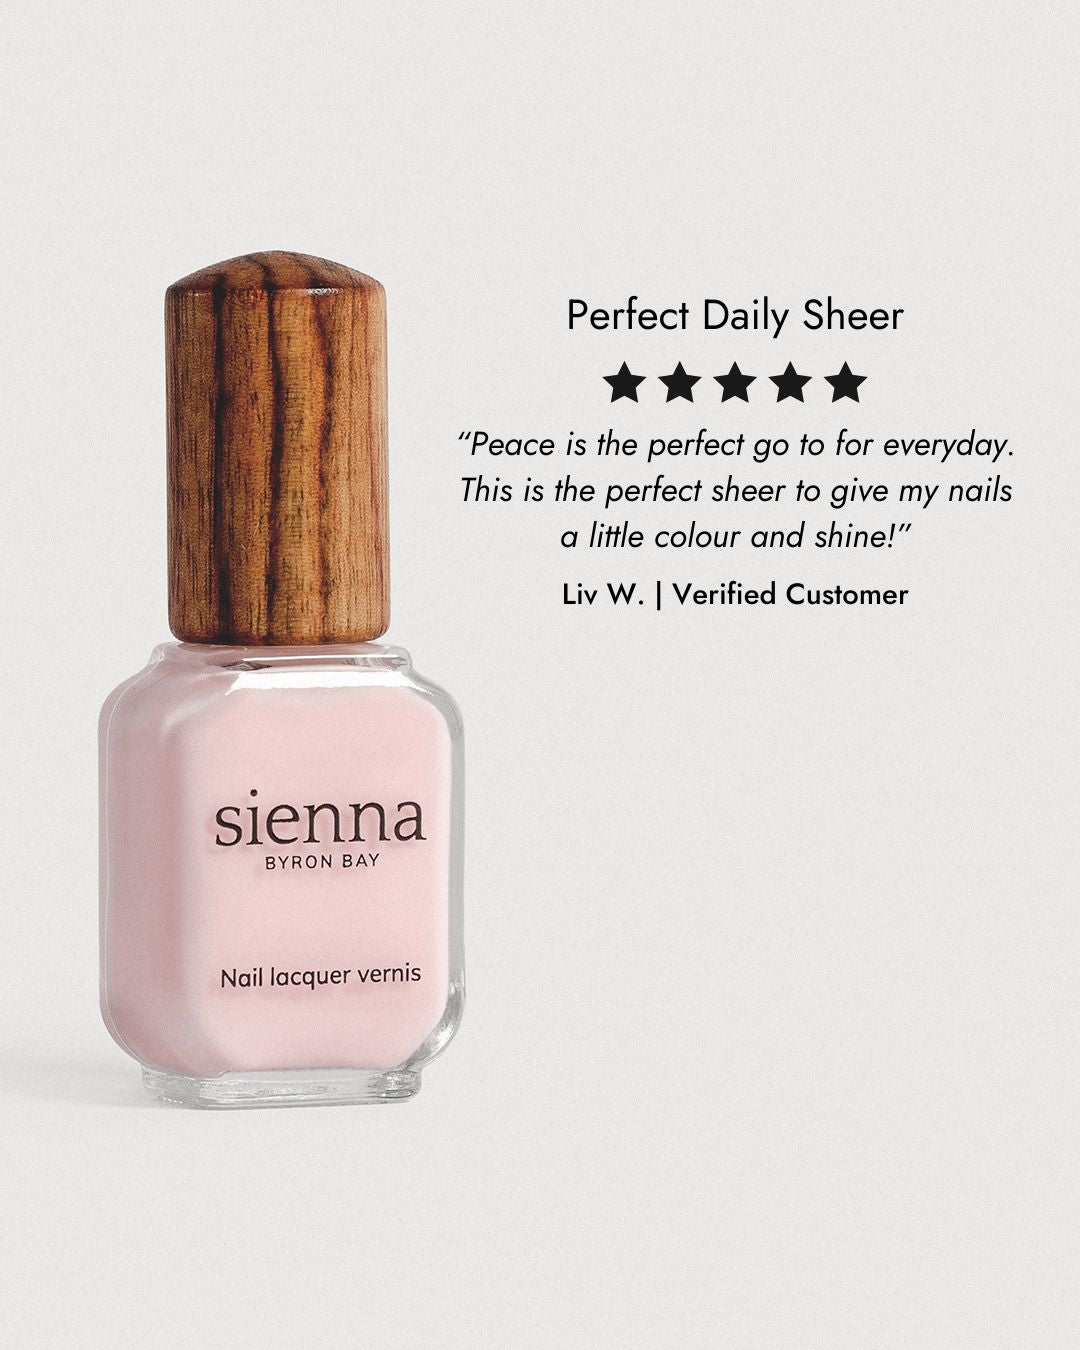 light rosewater pink sheer nail polish glass bottle with 5 star review